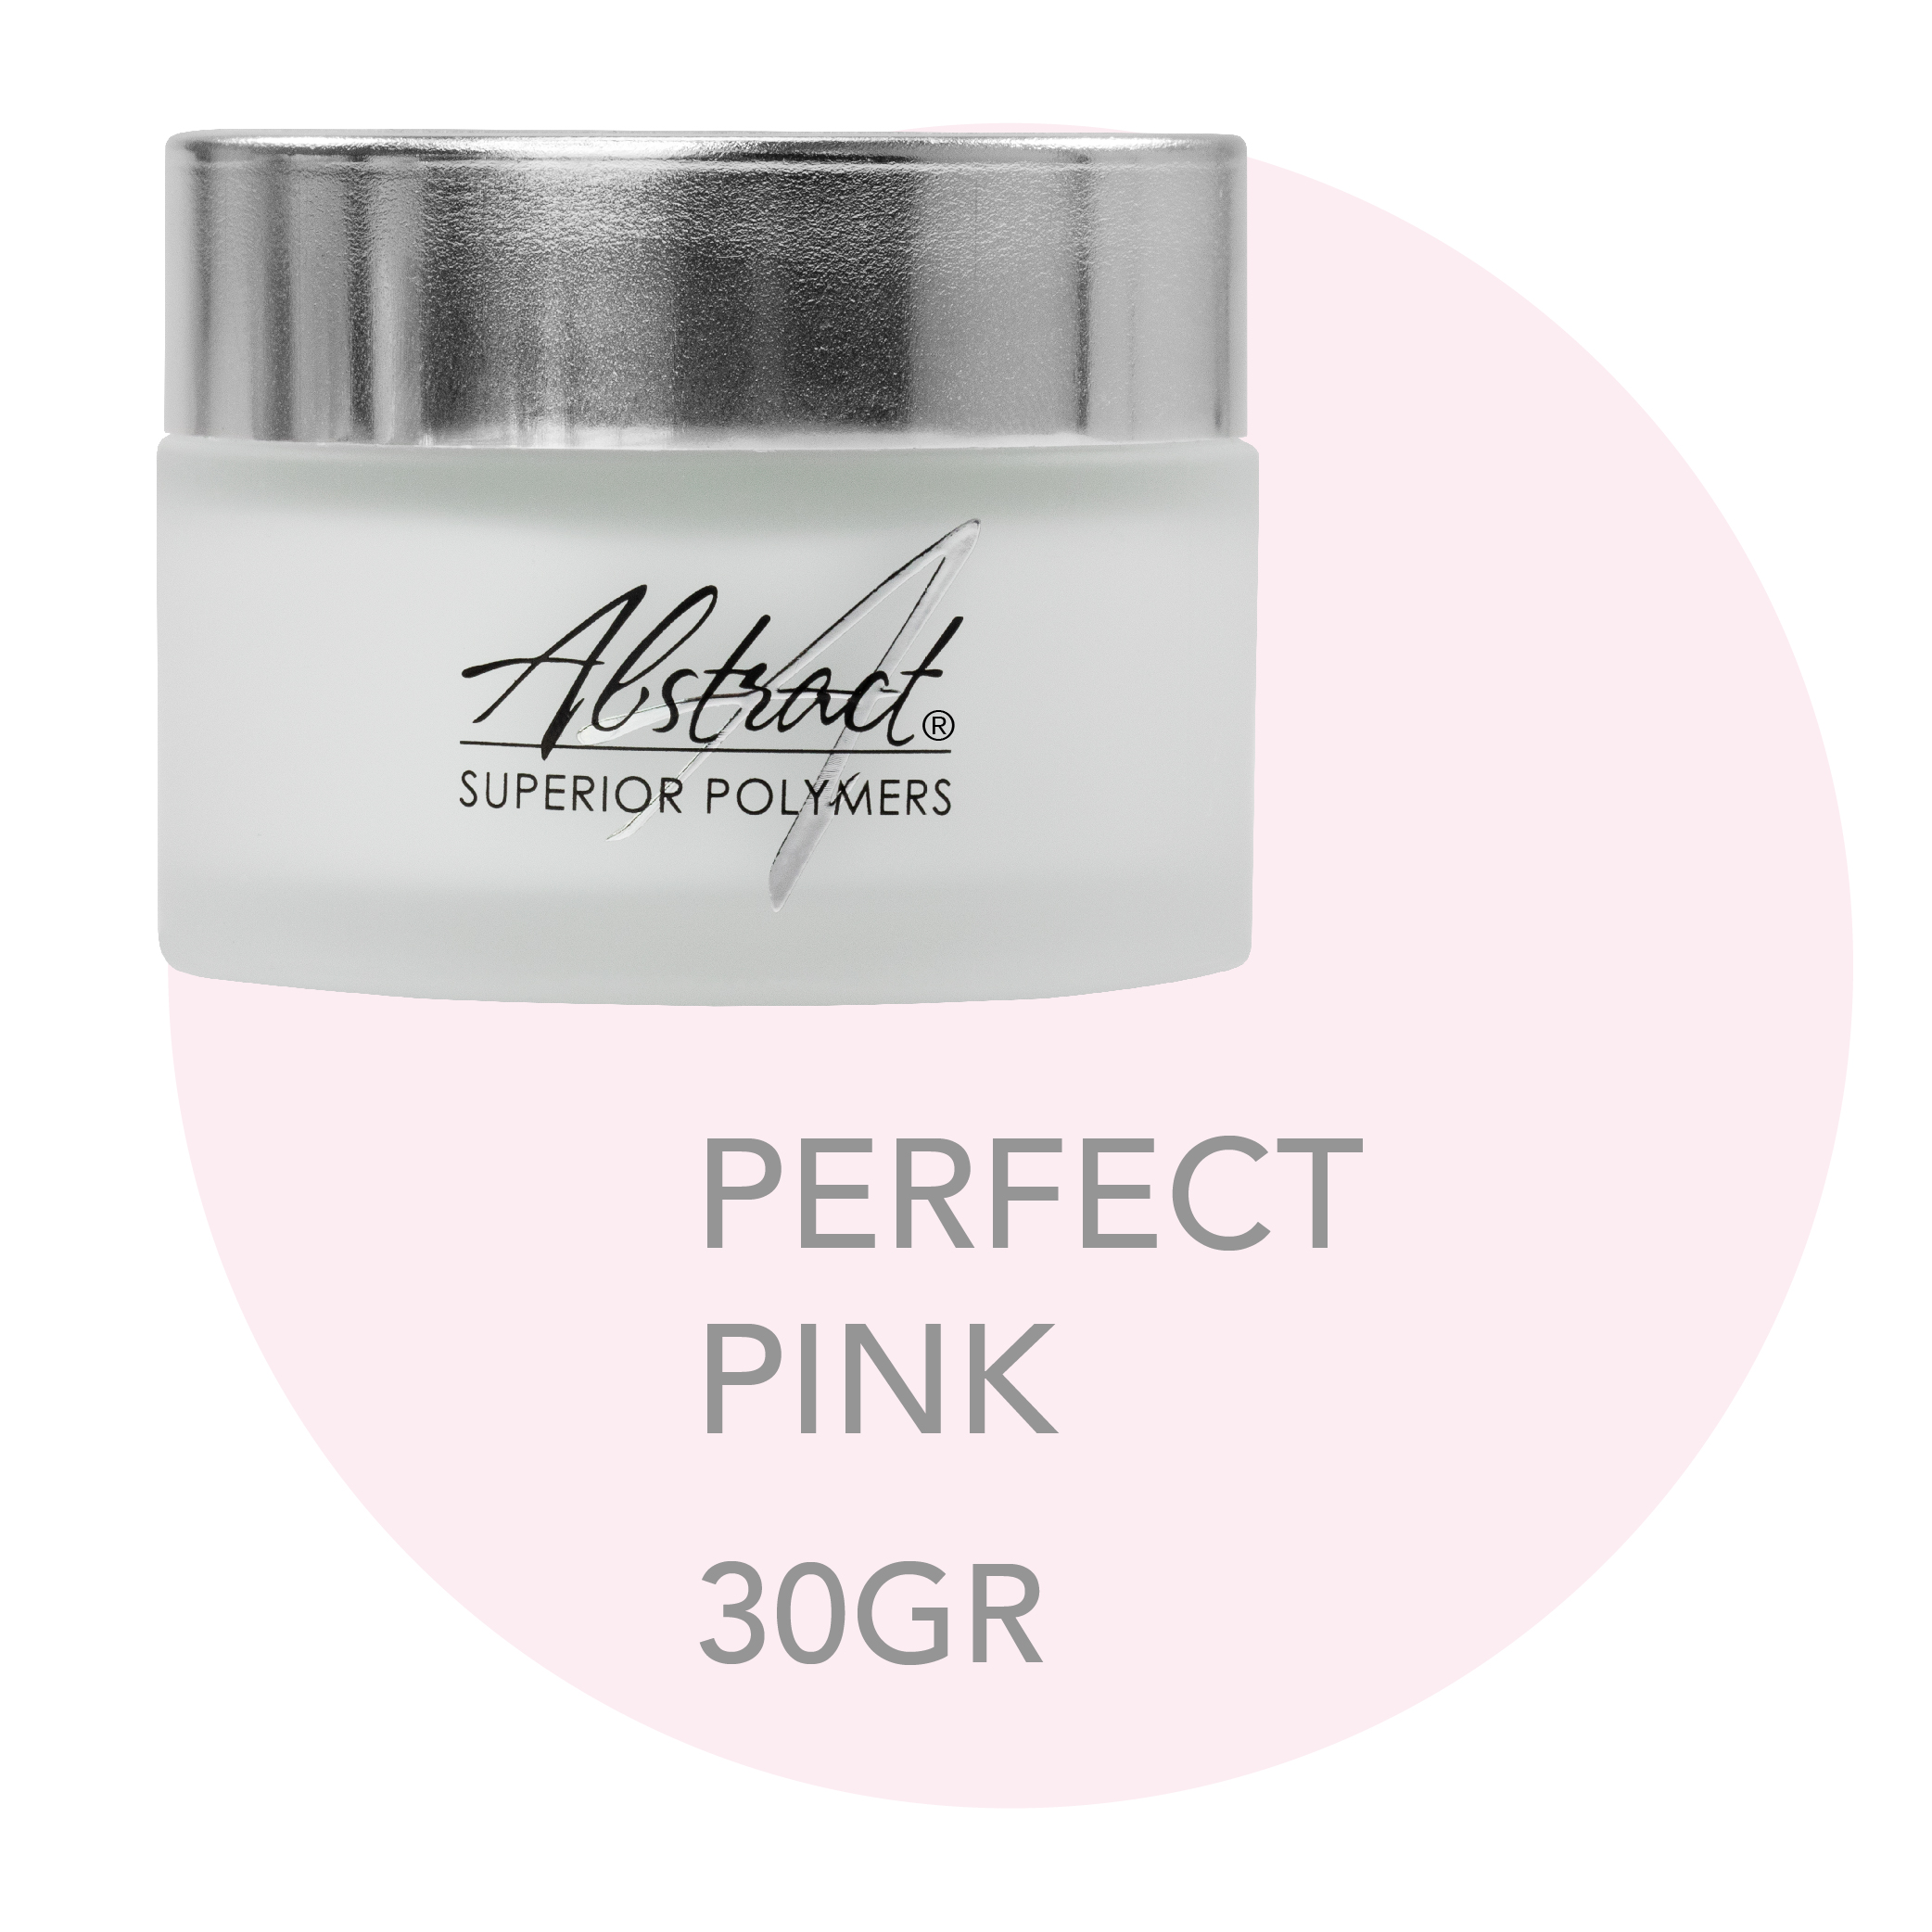 Superior Polymer PERFECT PINK 30gr, Abstract | 233712